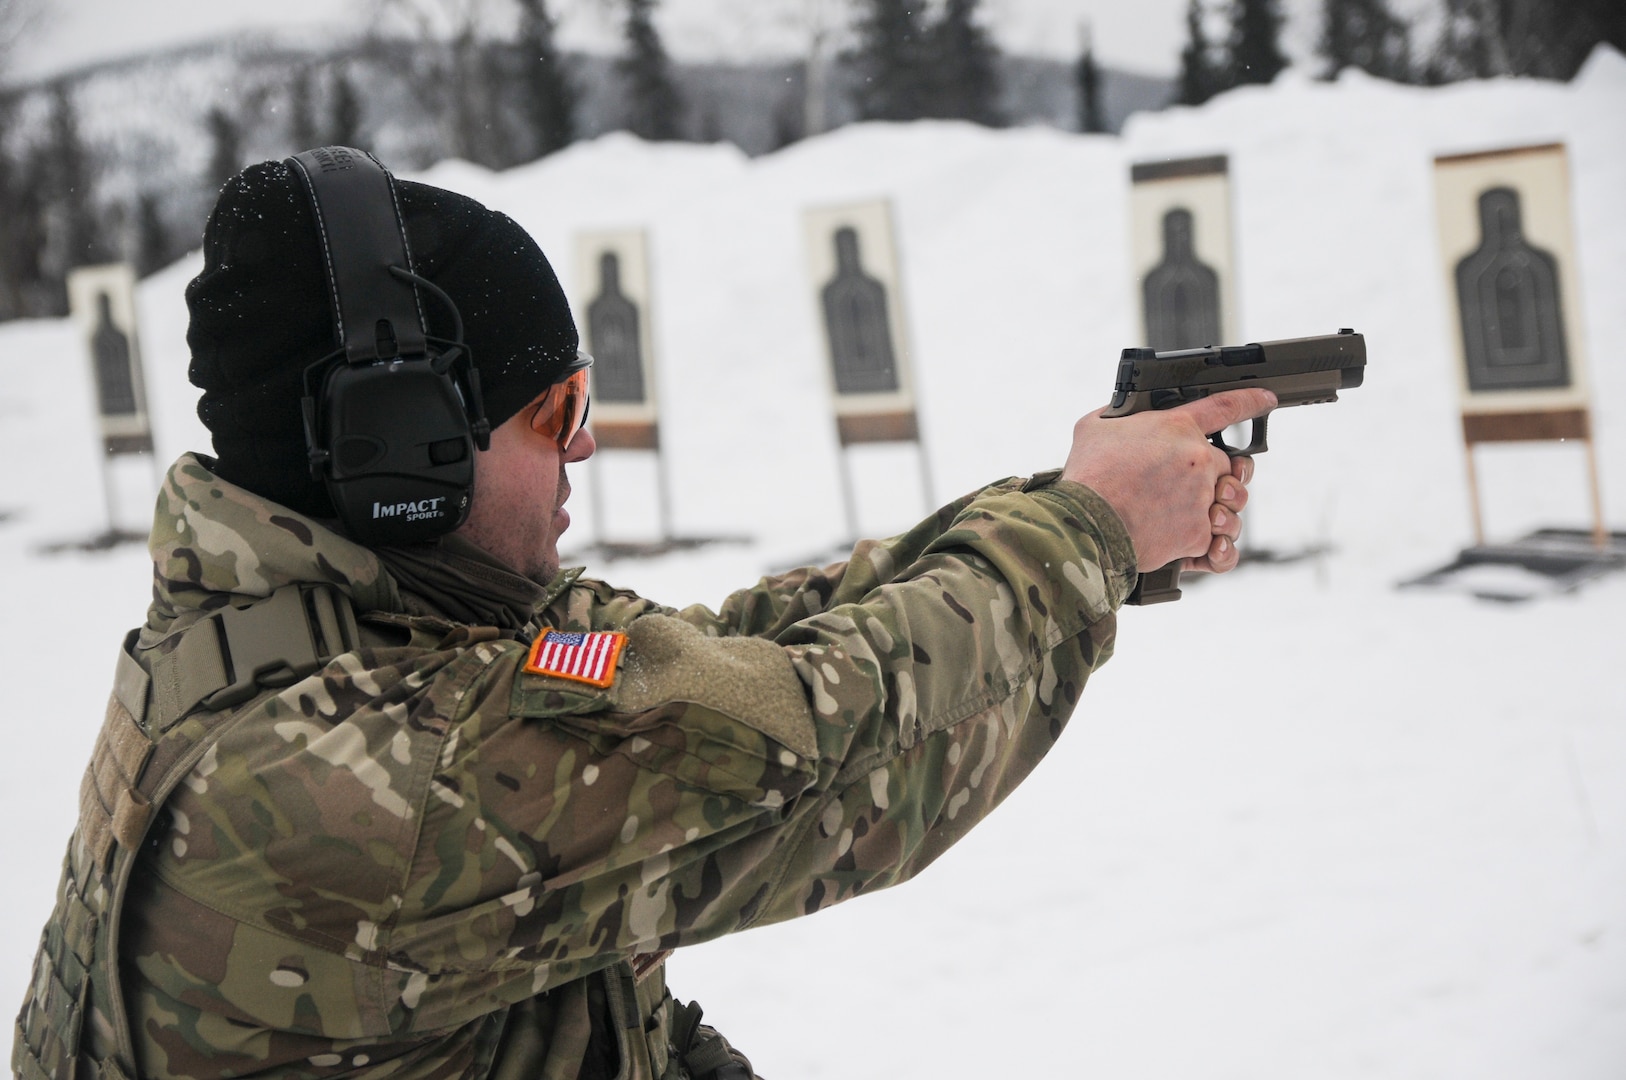 Staff Sgt. Sean E. Davis, a member of 1st Battalion, 297th Infantry Regiment, based in Joint Base Elmendorf-Richardson, Alaska, tests the new SIG Sauer M17 Army service pistol March 1, 2020, in the Yukon Training Area on Eielson Air Force Base as part of exercise Arctic Eagle 2020.